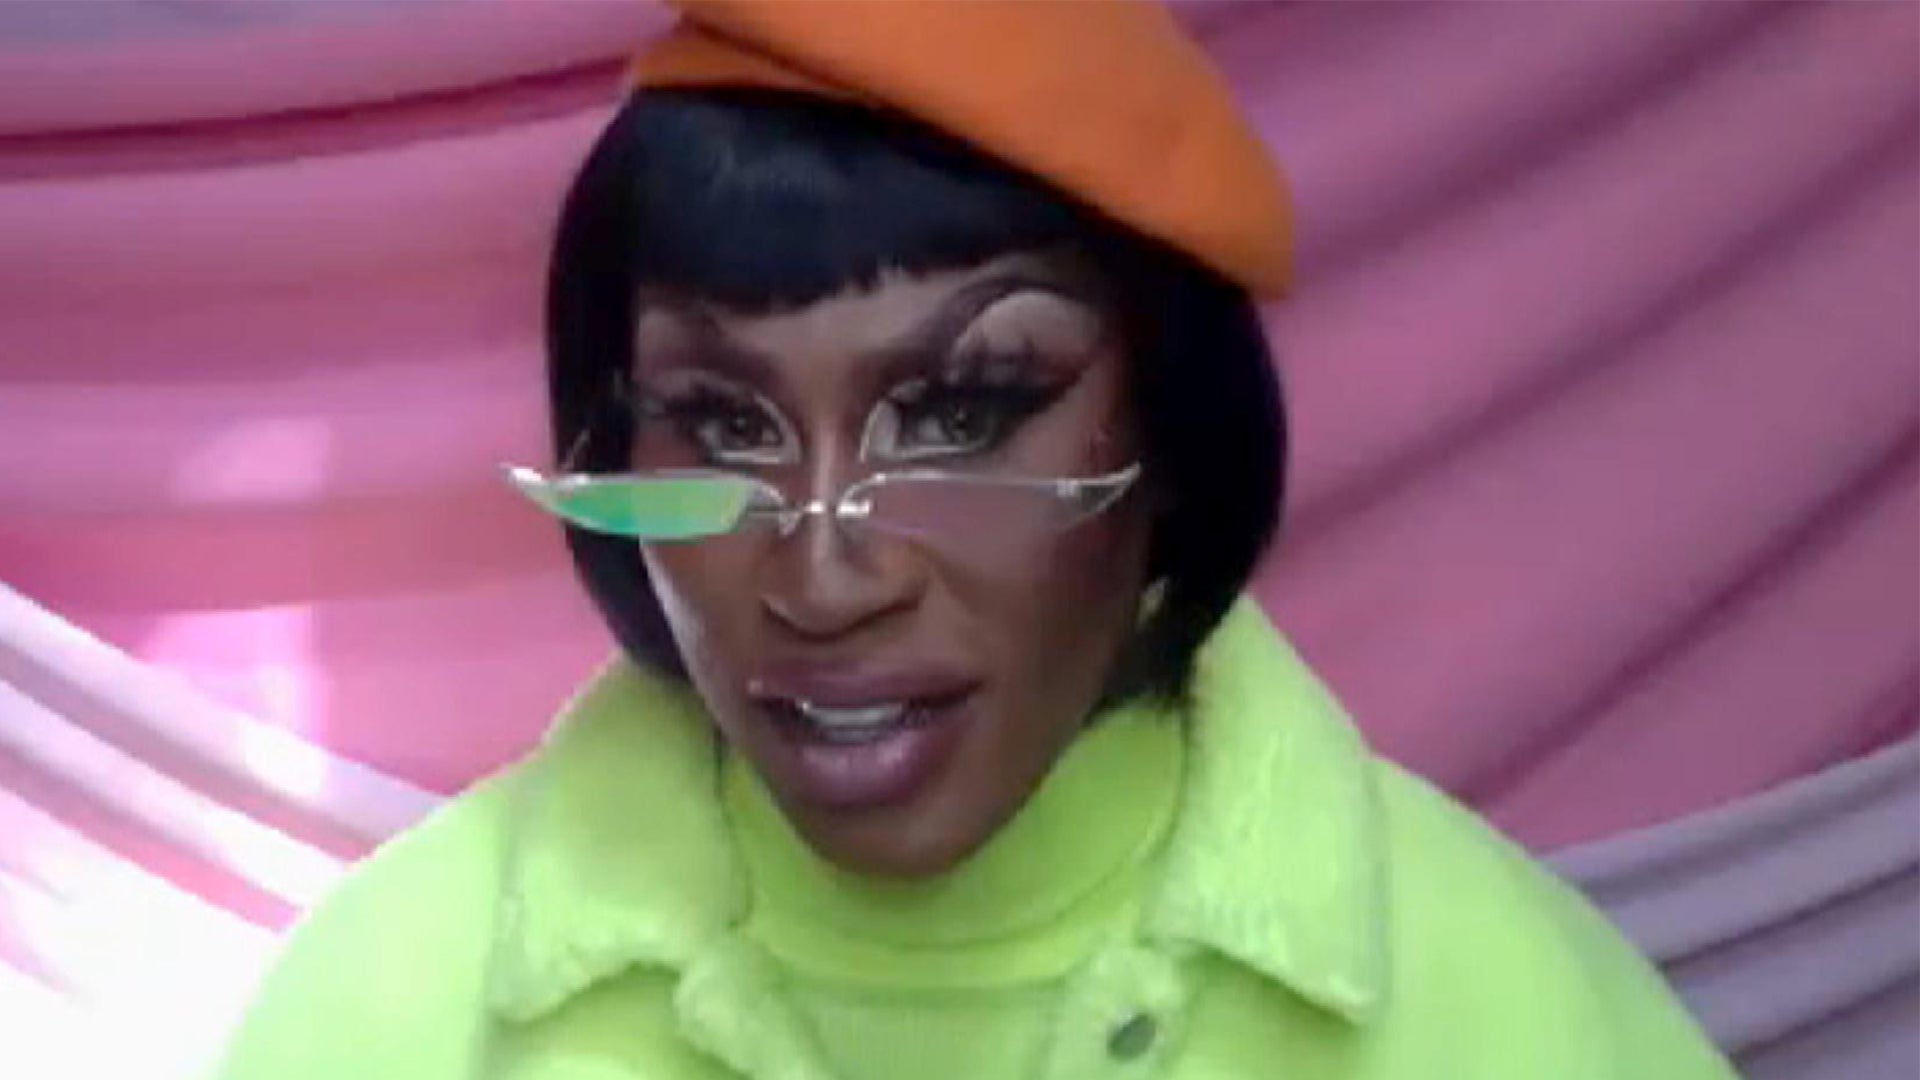 All Stars 5: Shea Coulée shares powerful statement ahead of Drag Race